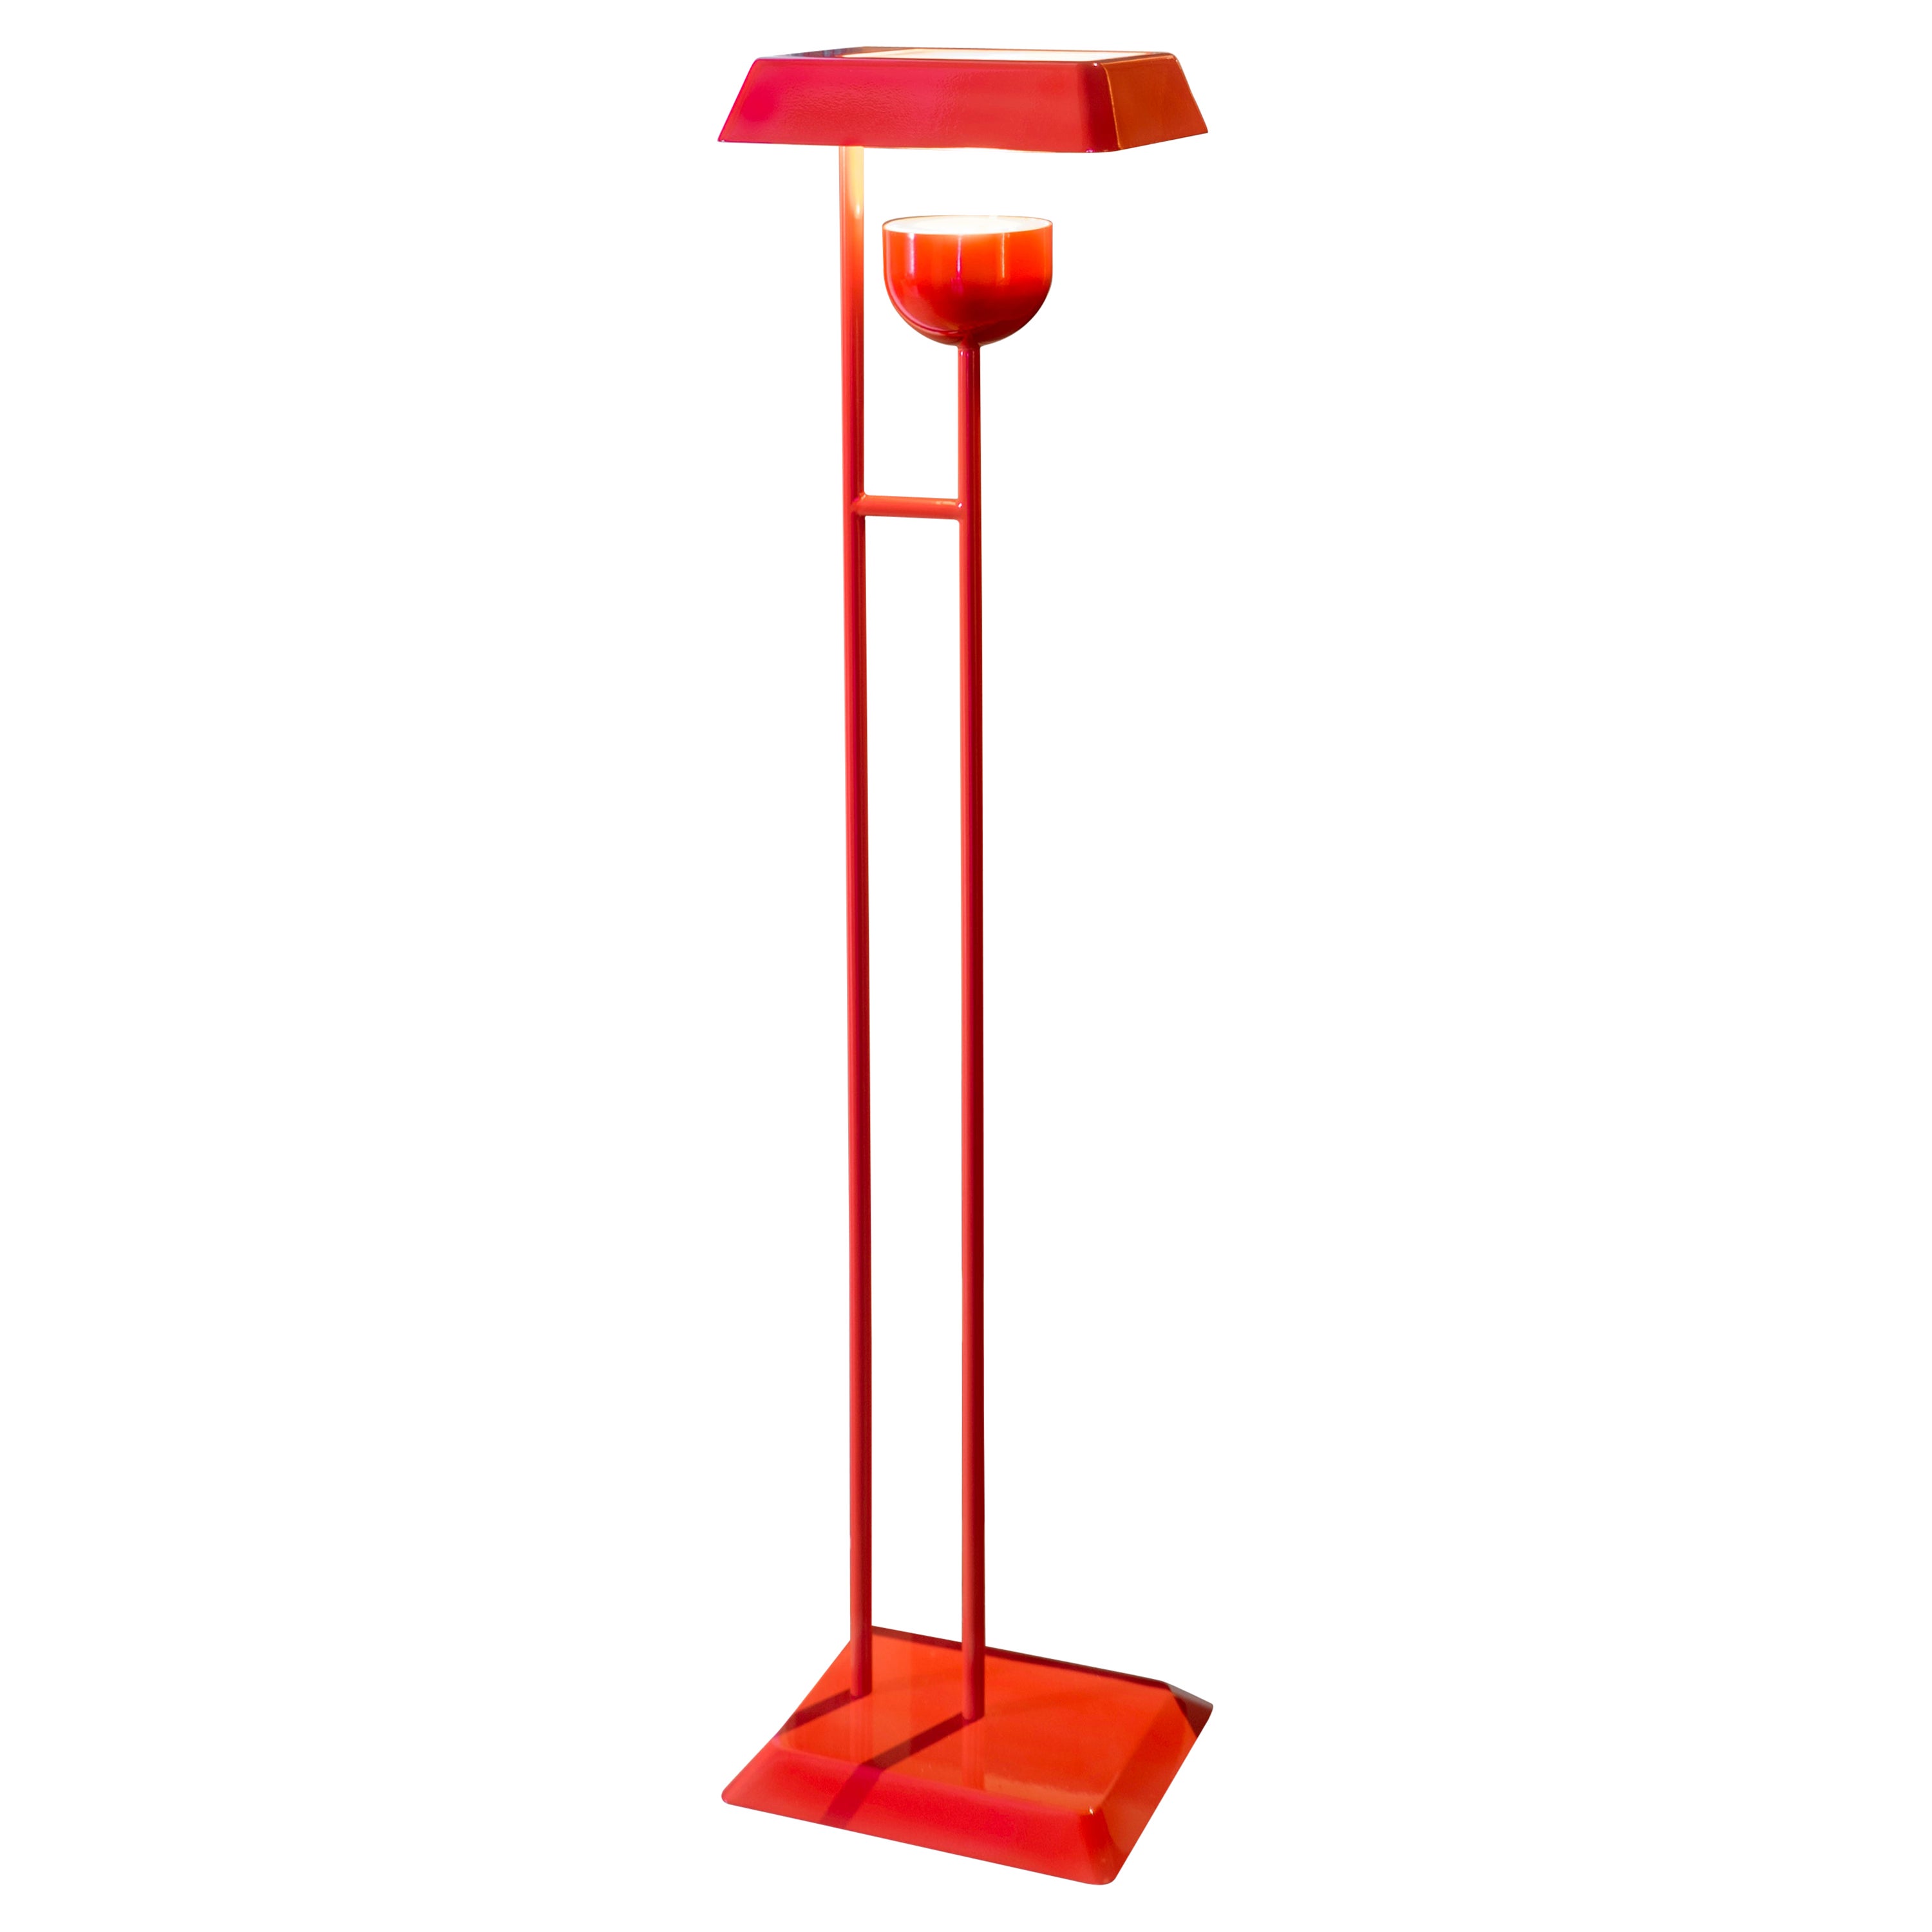 Trombone floor lamp.
This floor lamp is made of lacquered steel and diffusing PMMA on the top.

Dimensions: 11.81″ x H49.11″

This floor lamp comes in 3 colors: red, black, and navy blue

Tristan Auer is an interior architect and a designer and set